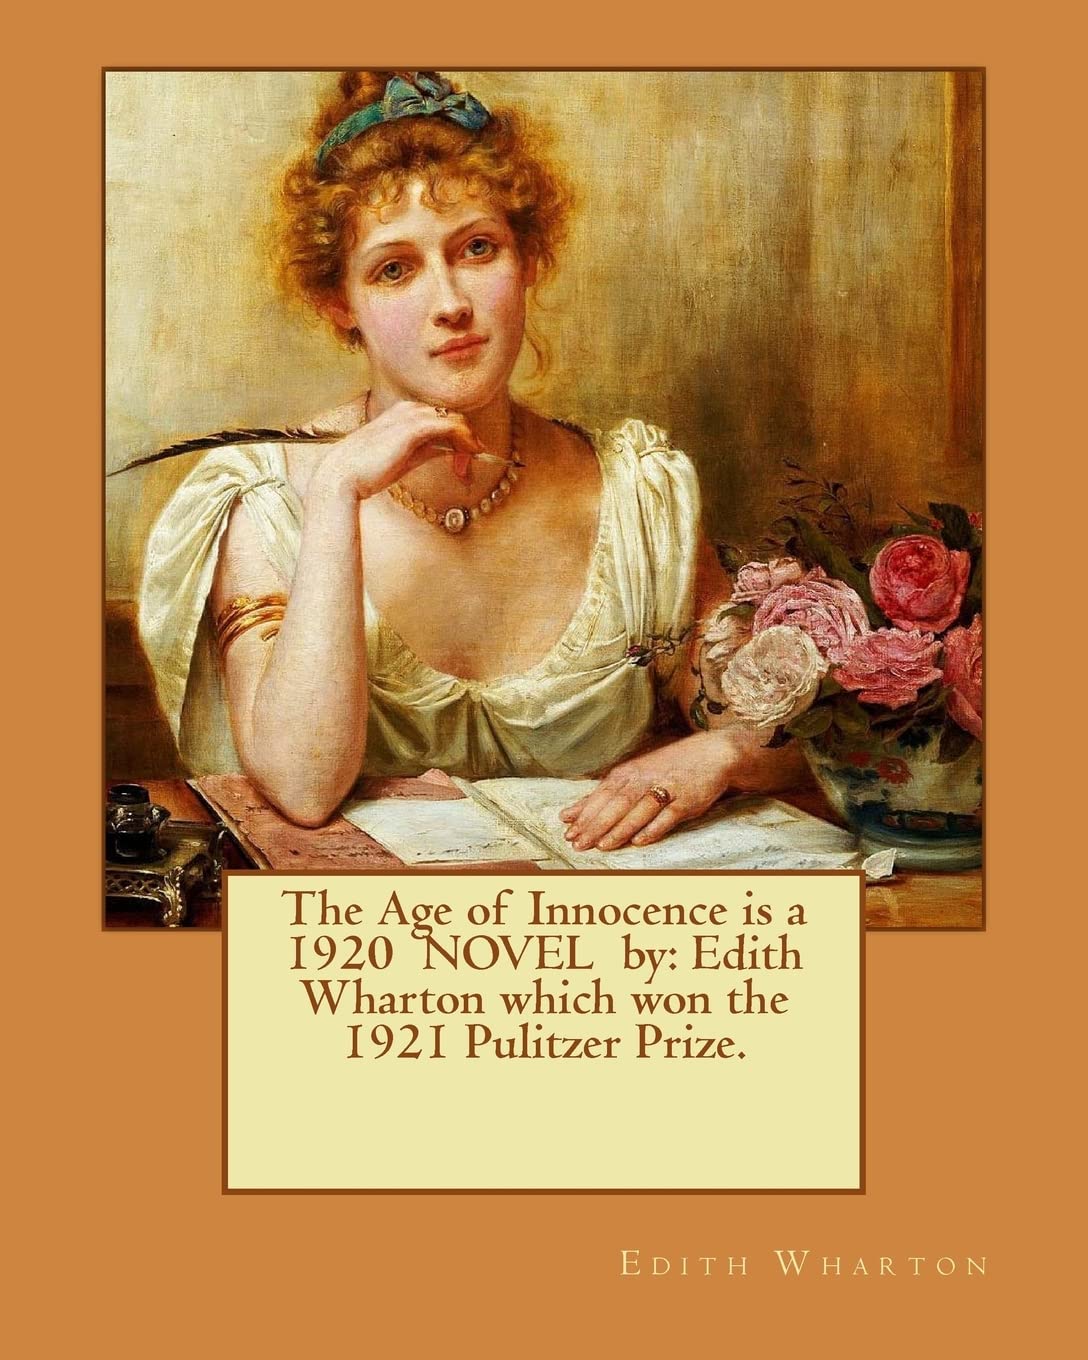 The Age of Innocence by Edith Warton (1920)